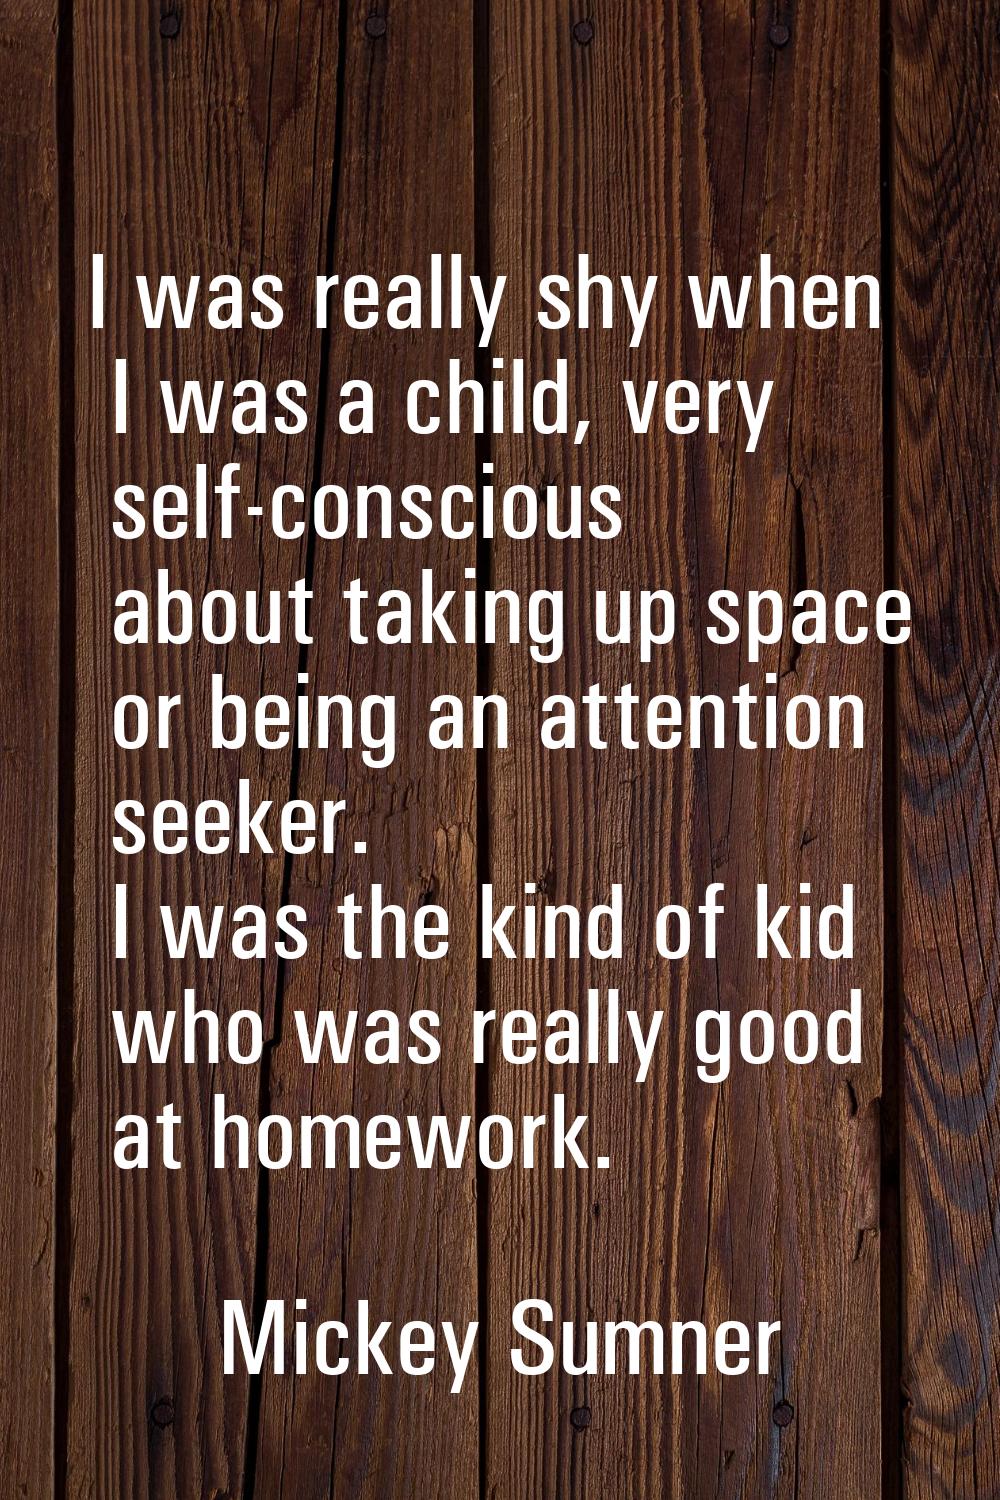 I was really shy when I was a child, very self-conscious about taking up space or being an attentio